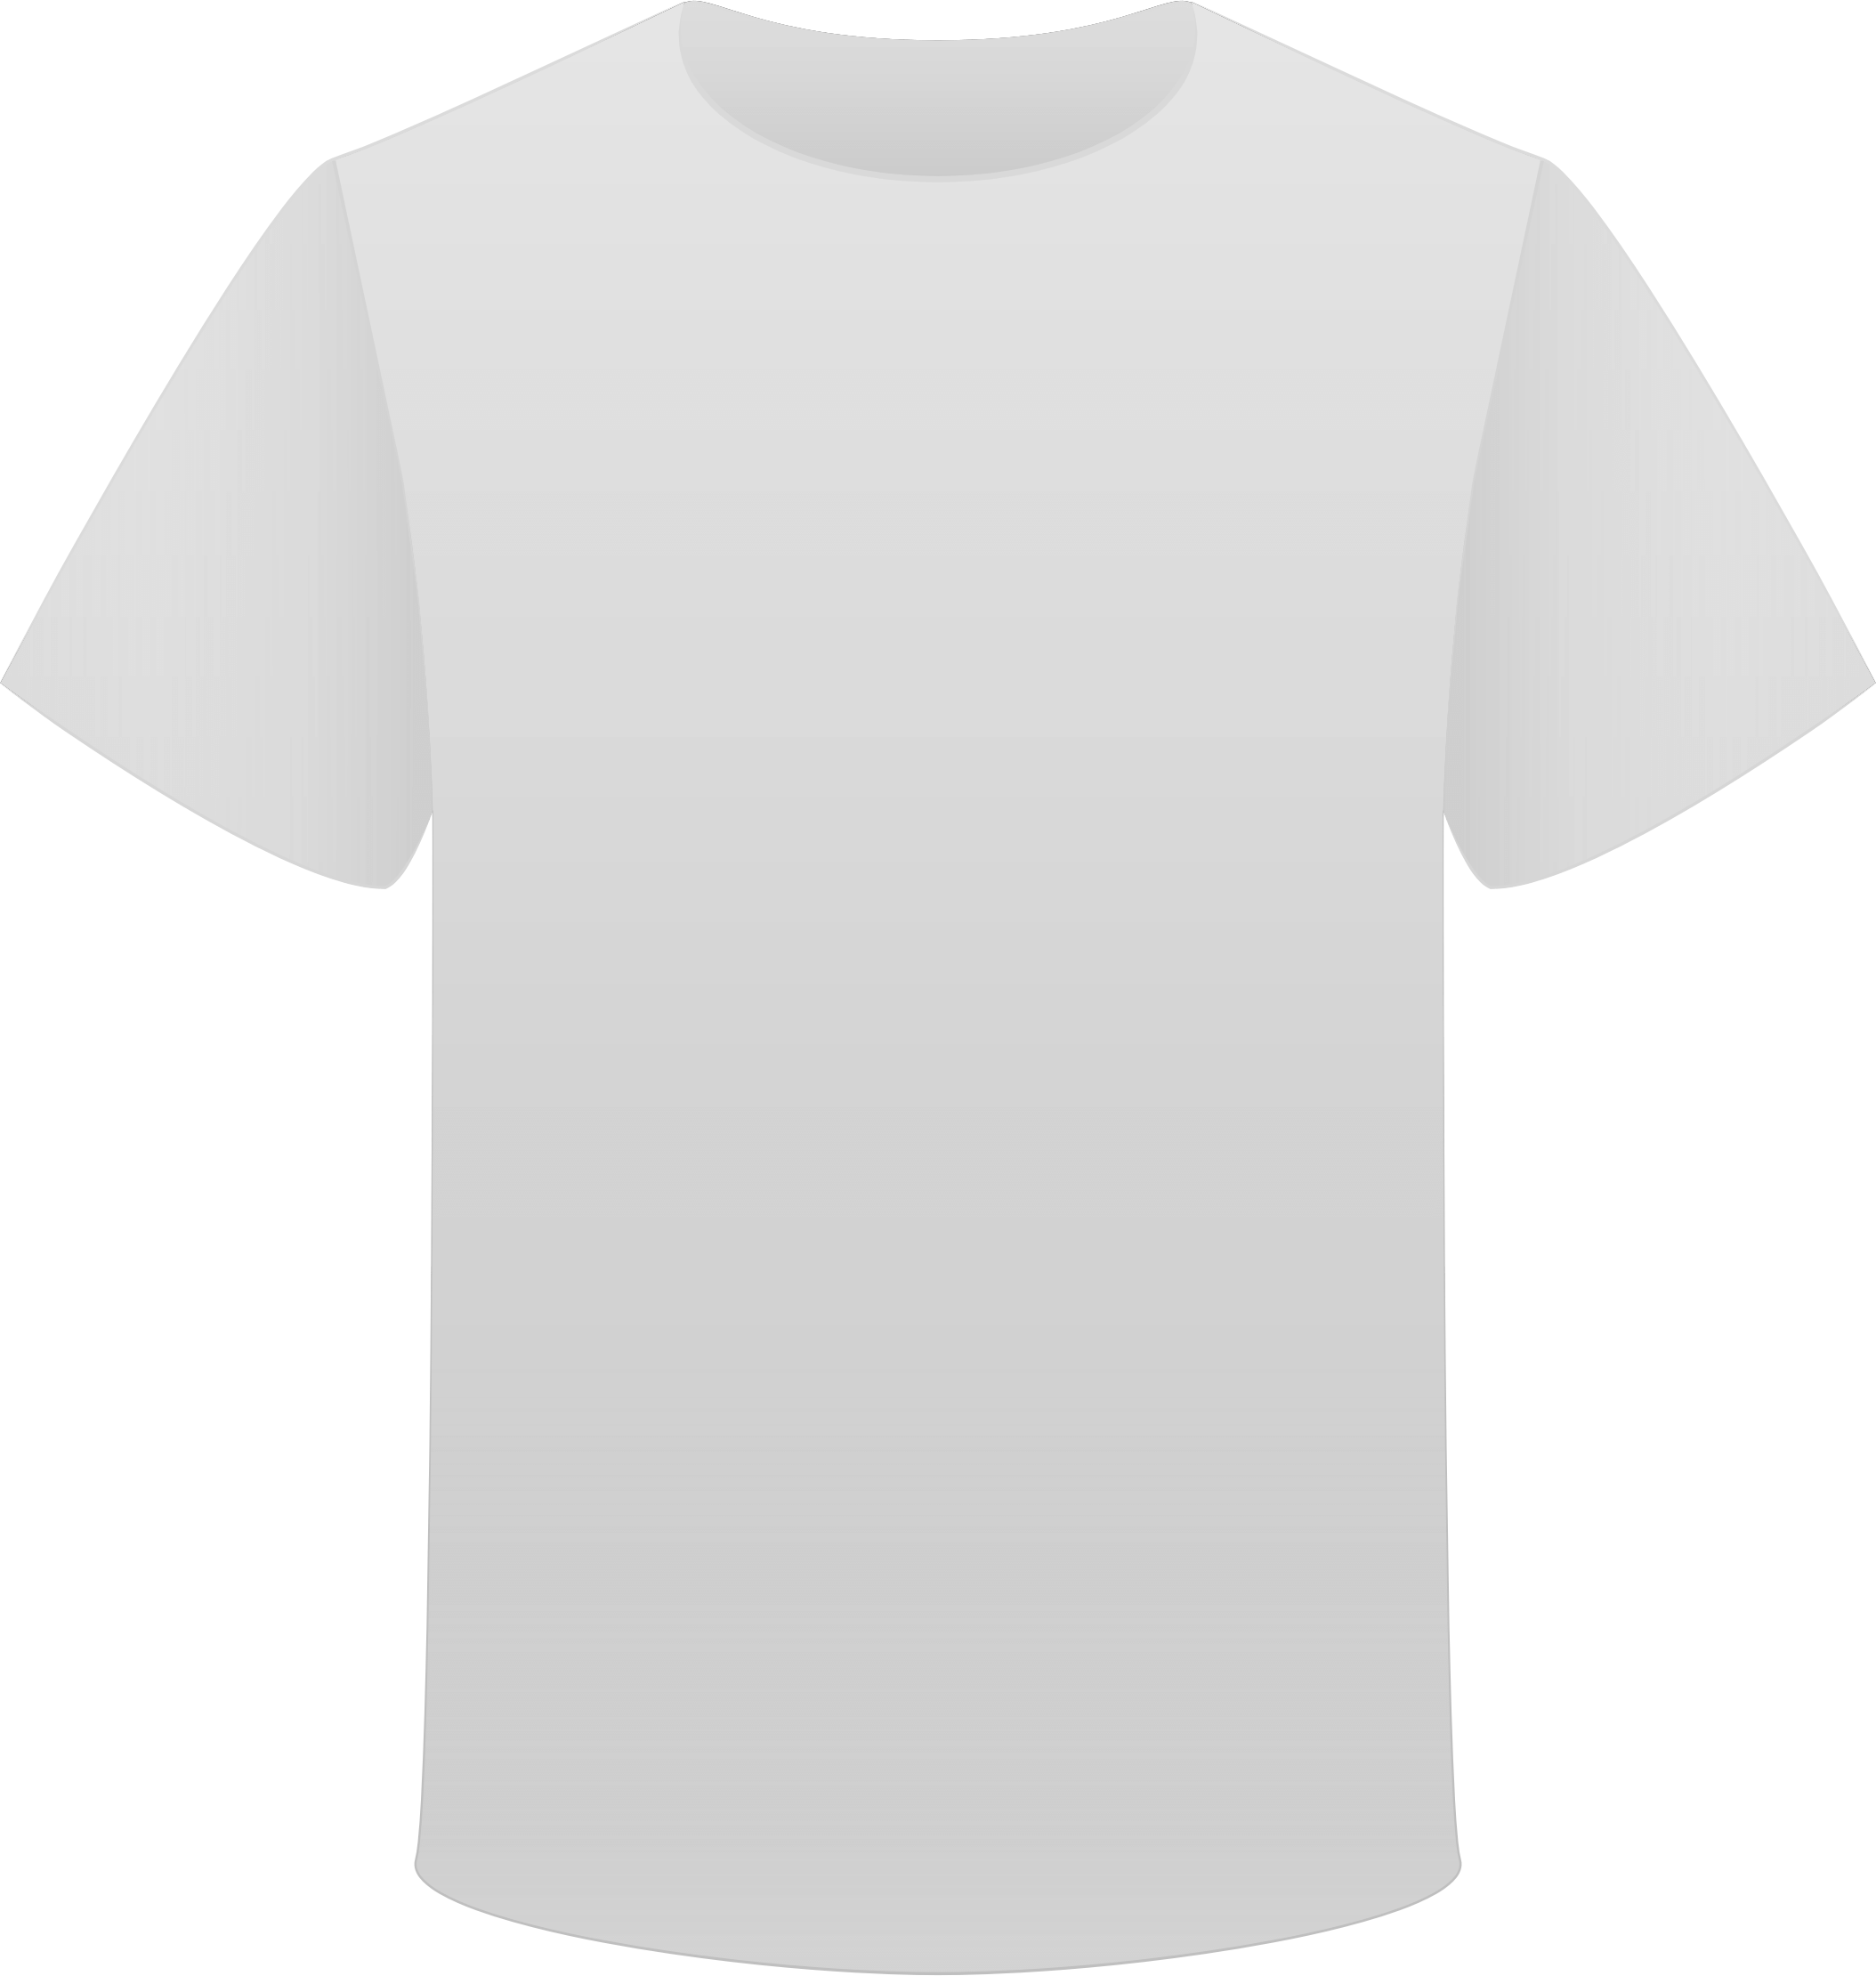 T-shirt Shirt Red Free Vector Graphic On Pixabay - White T Shirts For Men (2108x2220)